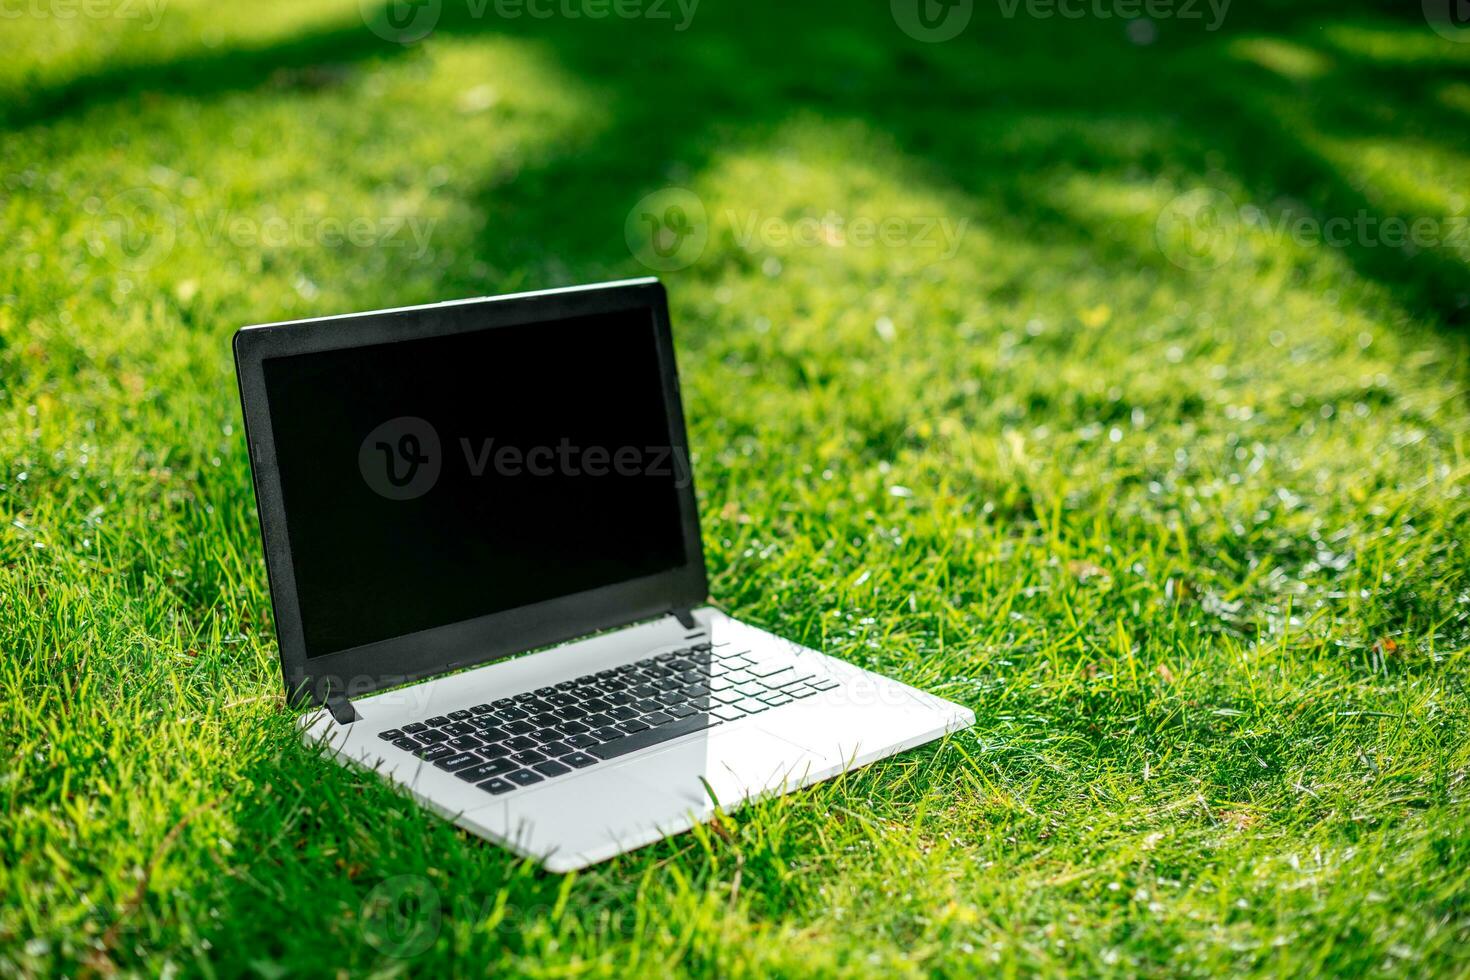 Laptop with blank screen on green lawn photo